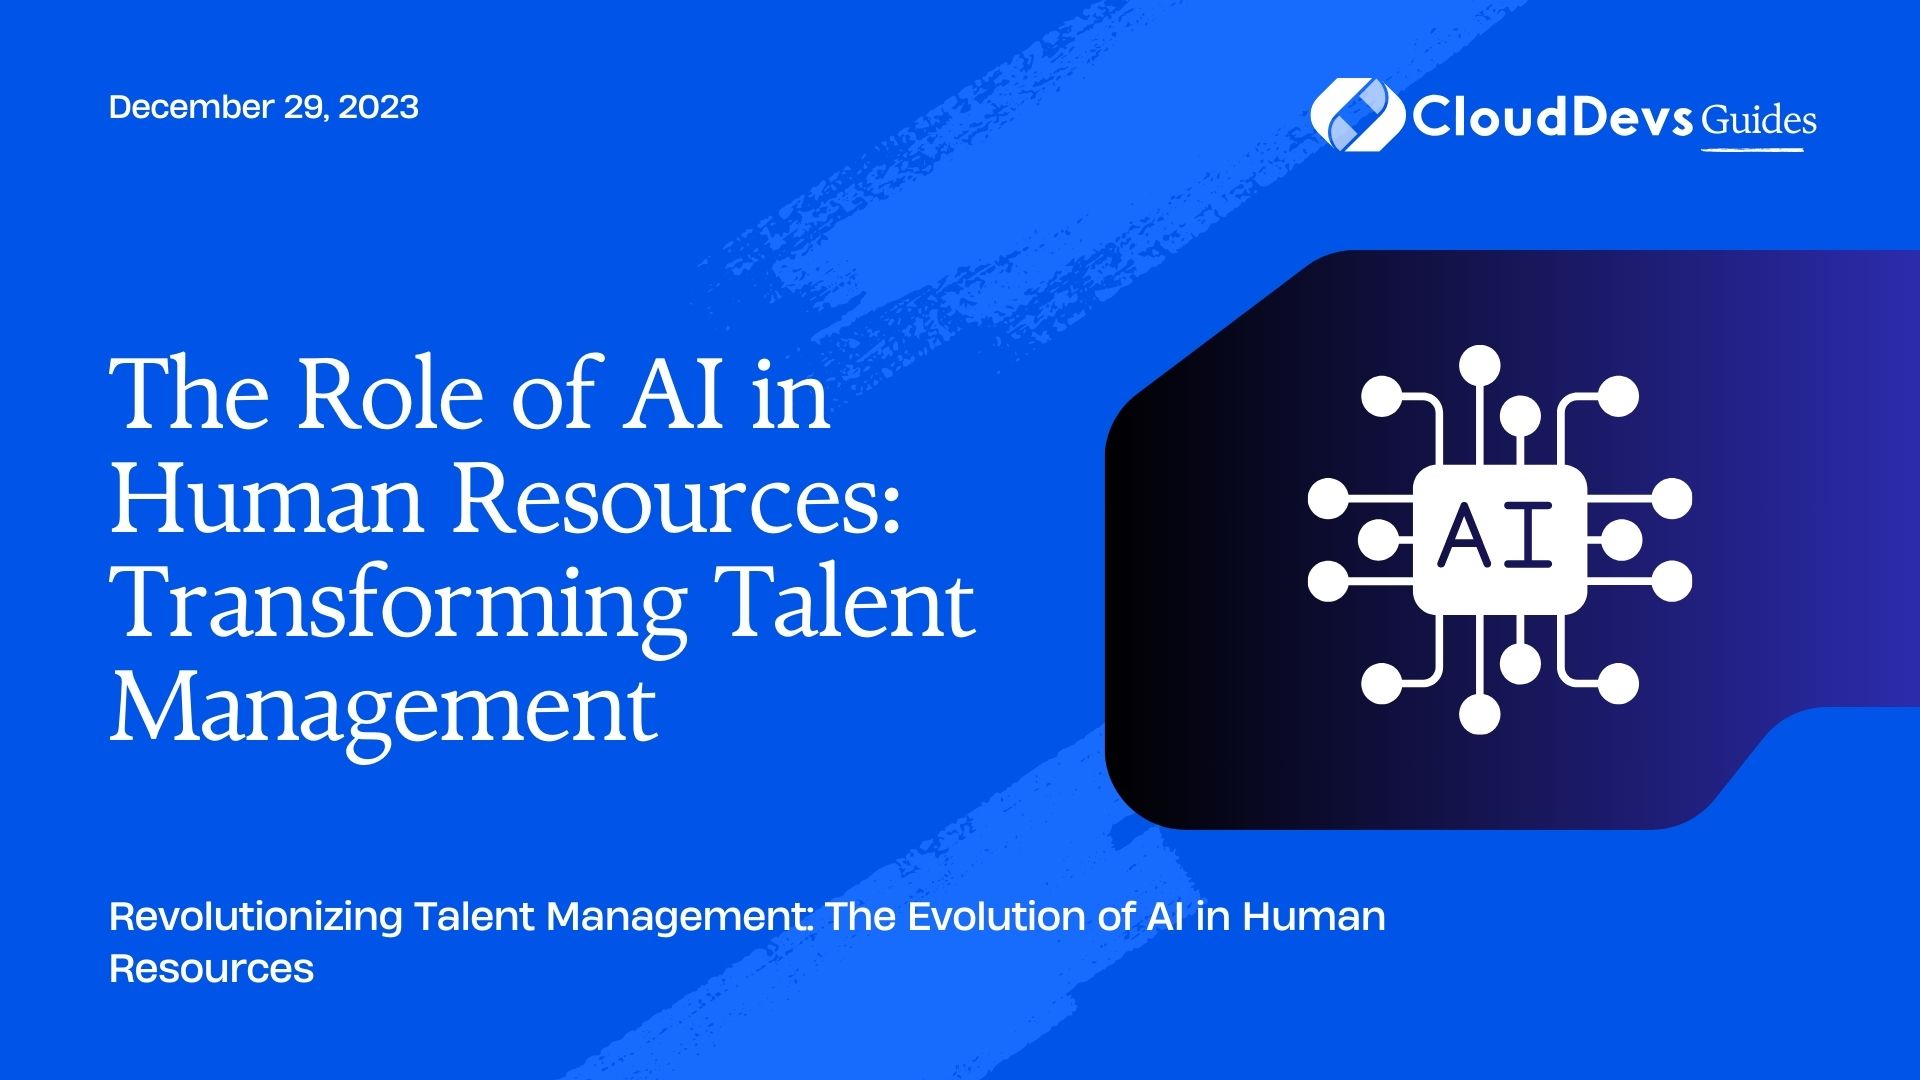 The Role of AI in Human Resources: Transforming Talent Management